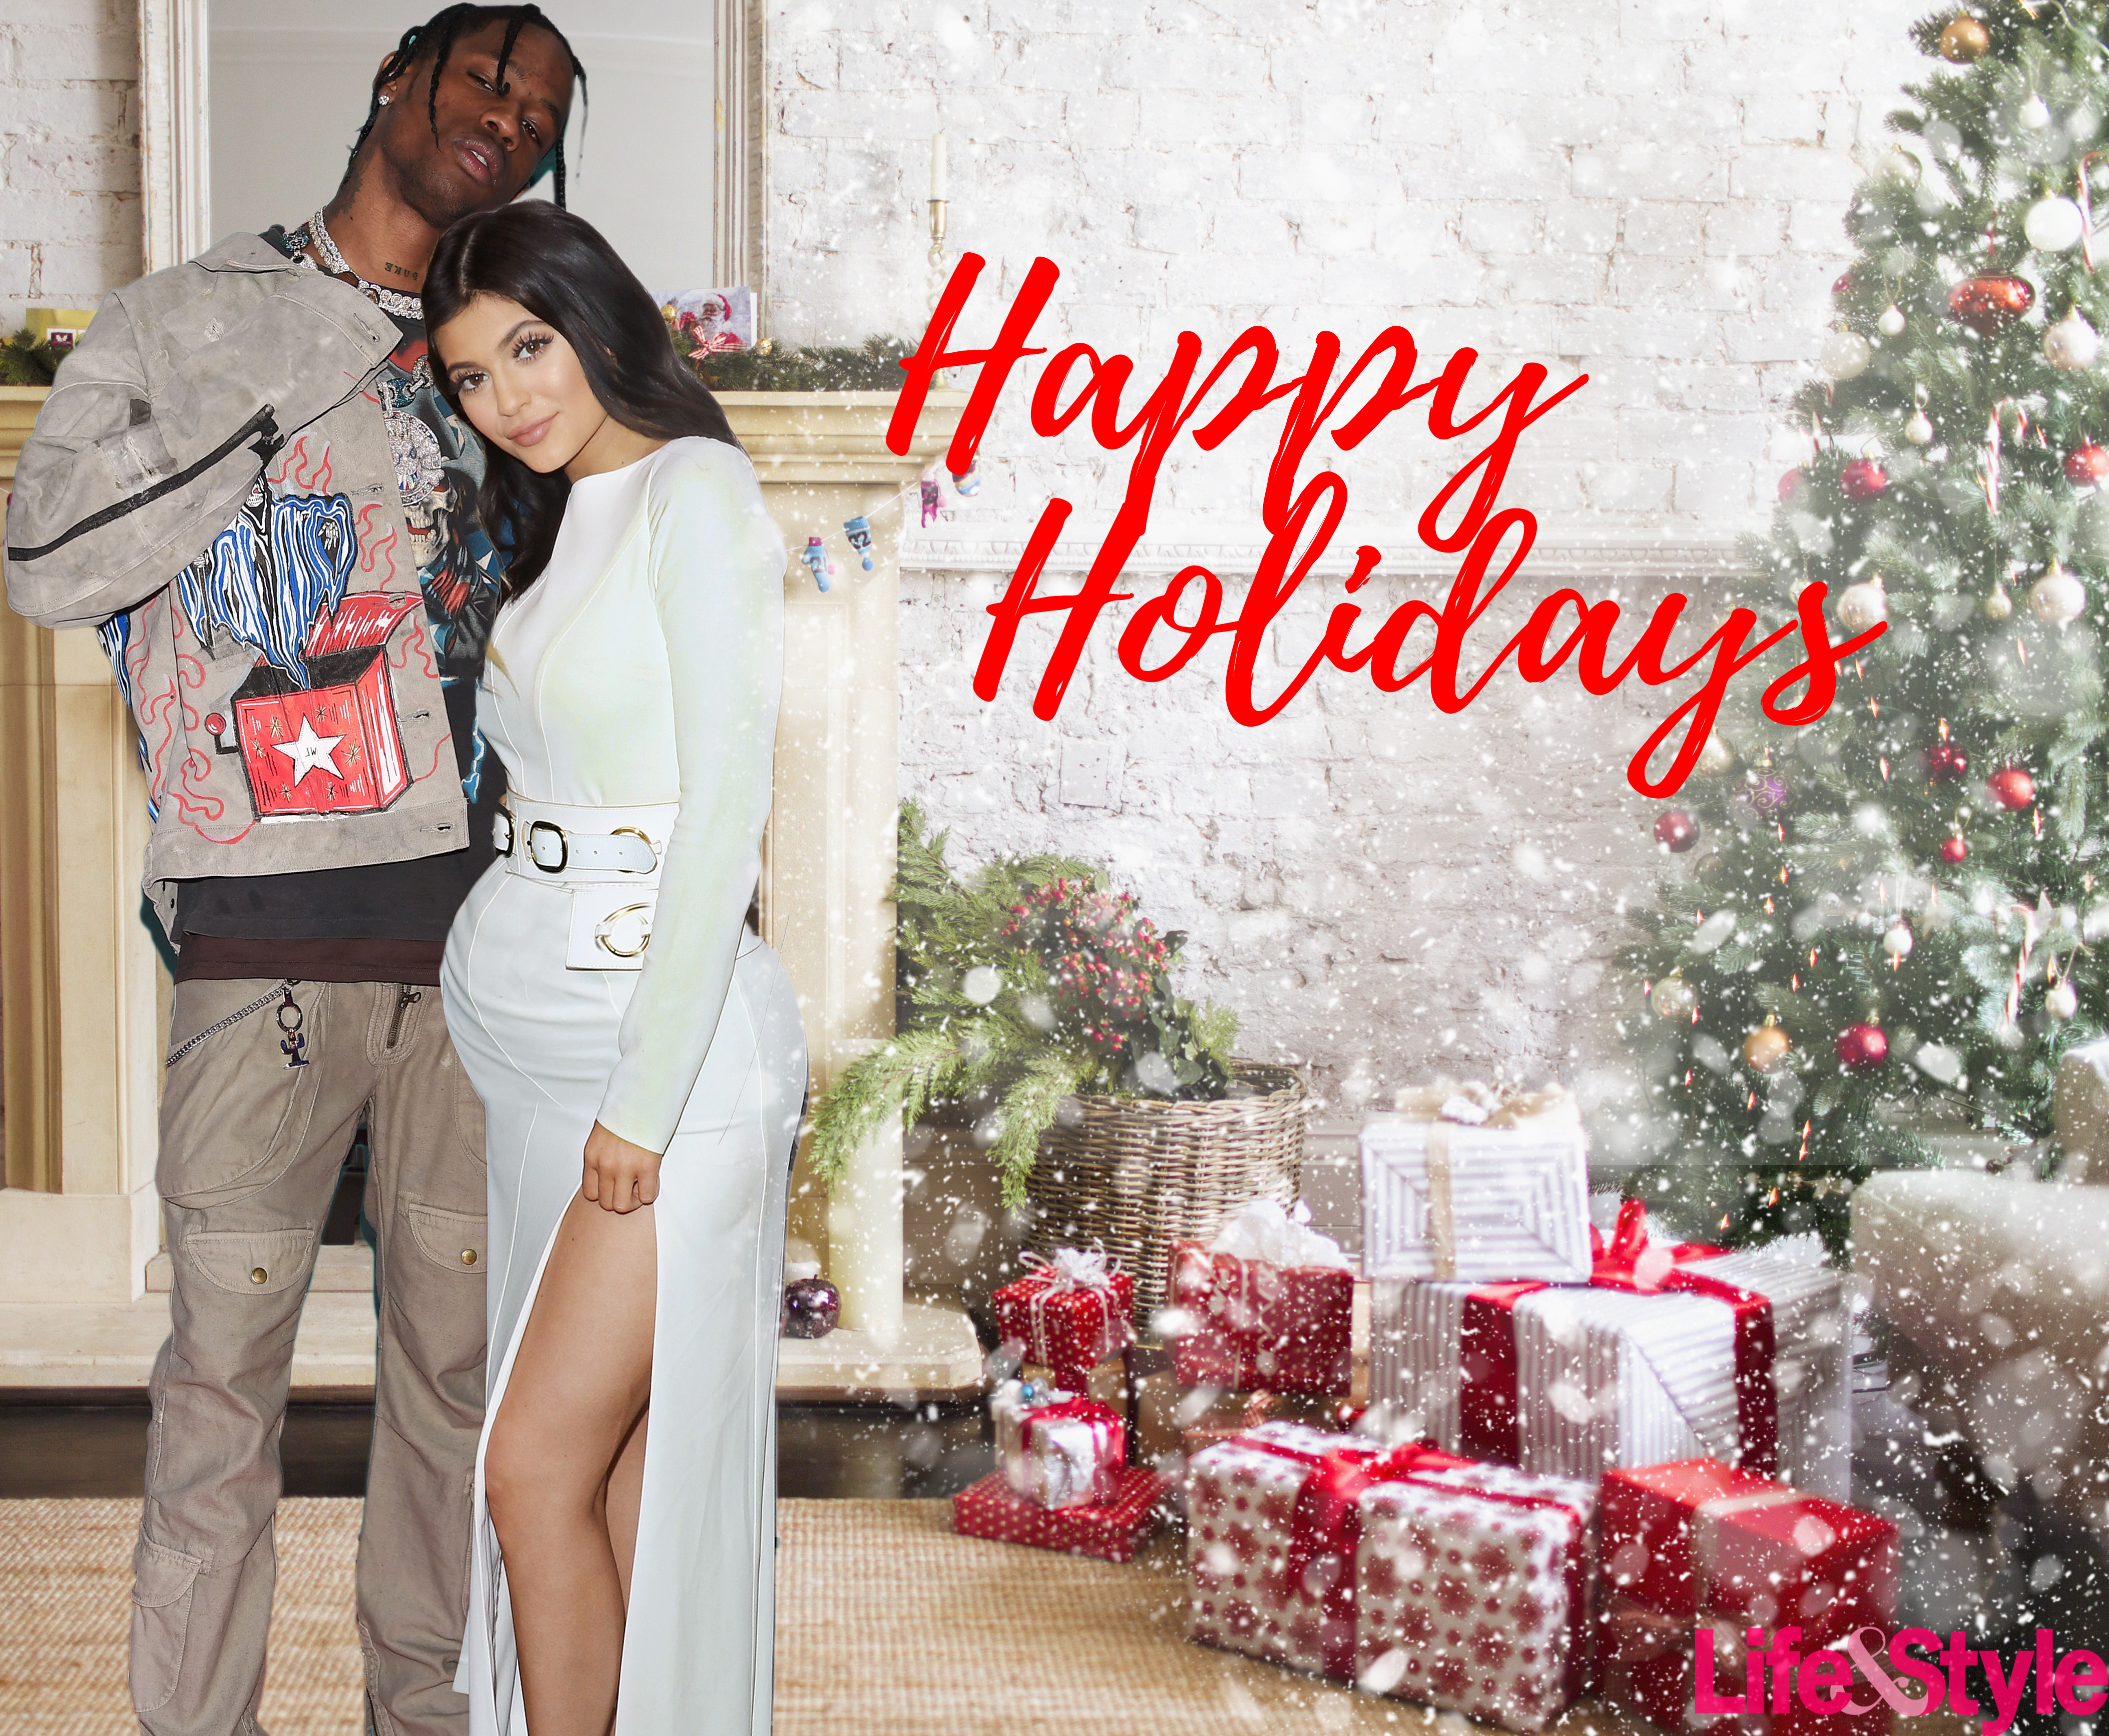 Kardashians Christmas Cards See Our 2017 Predictions